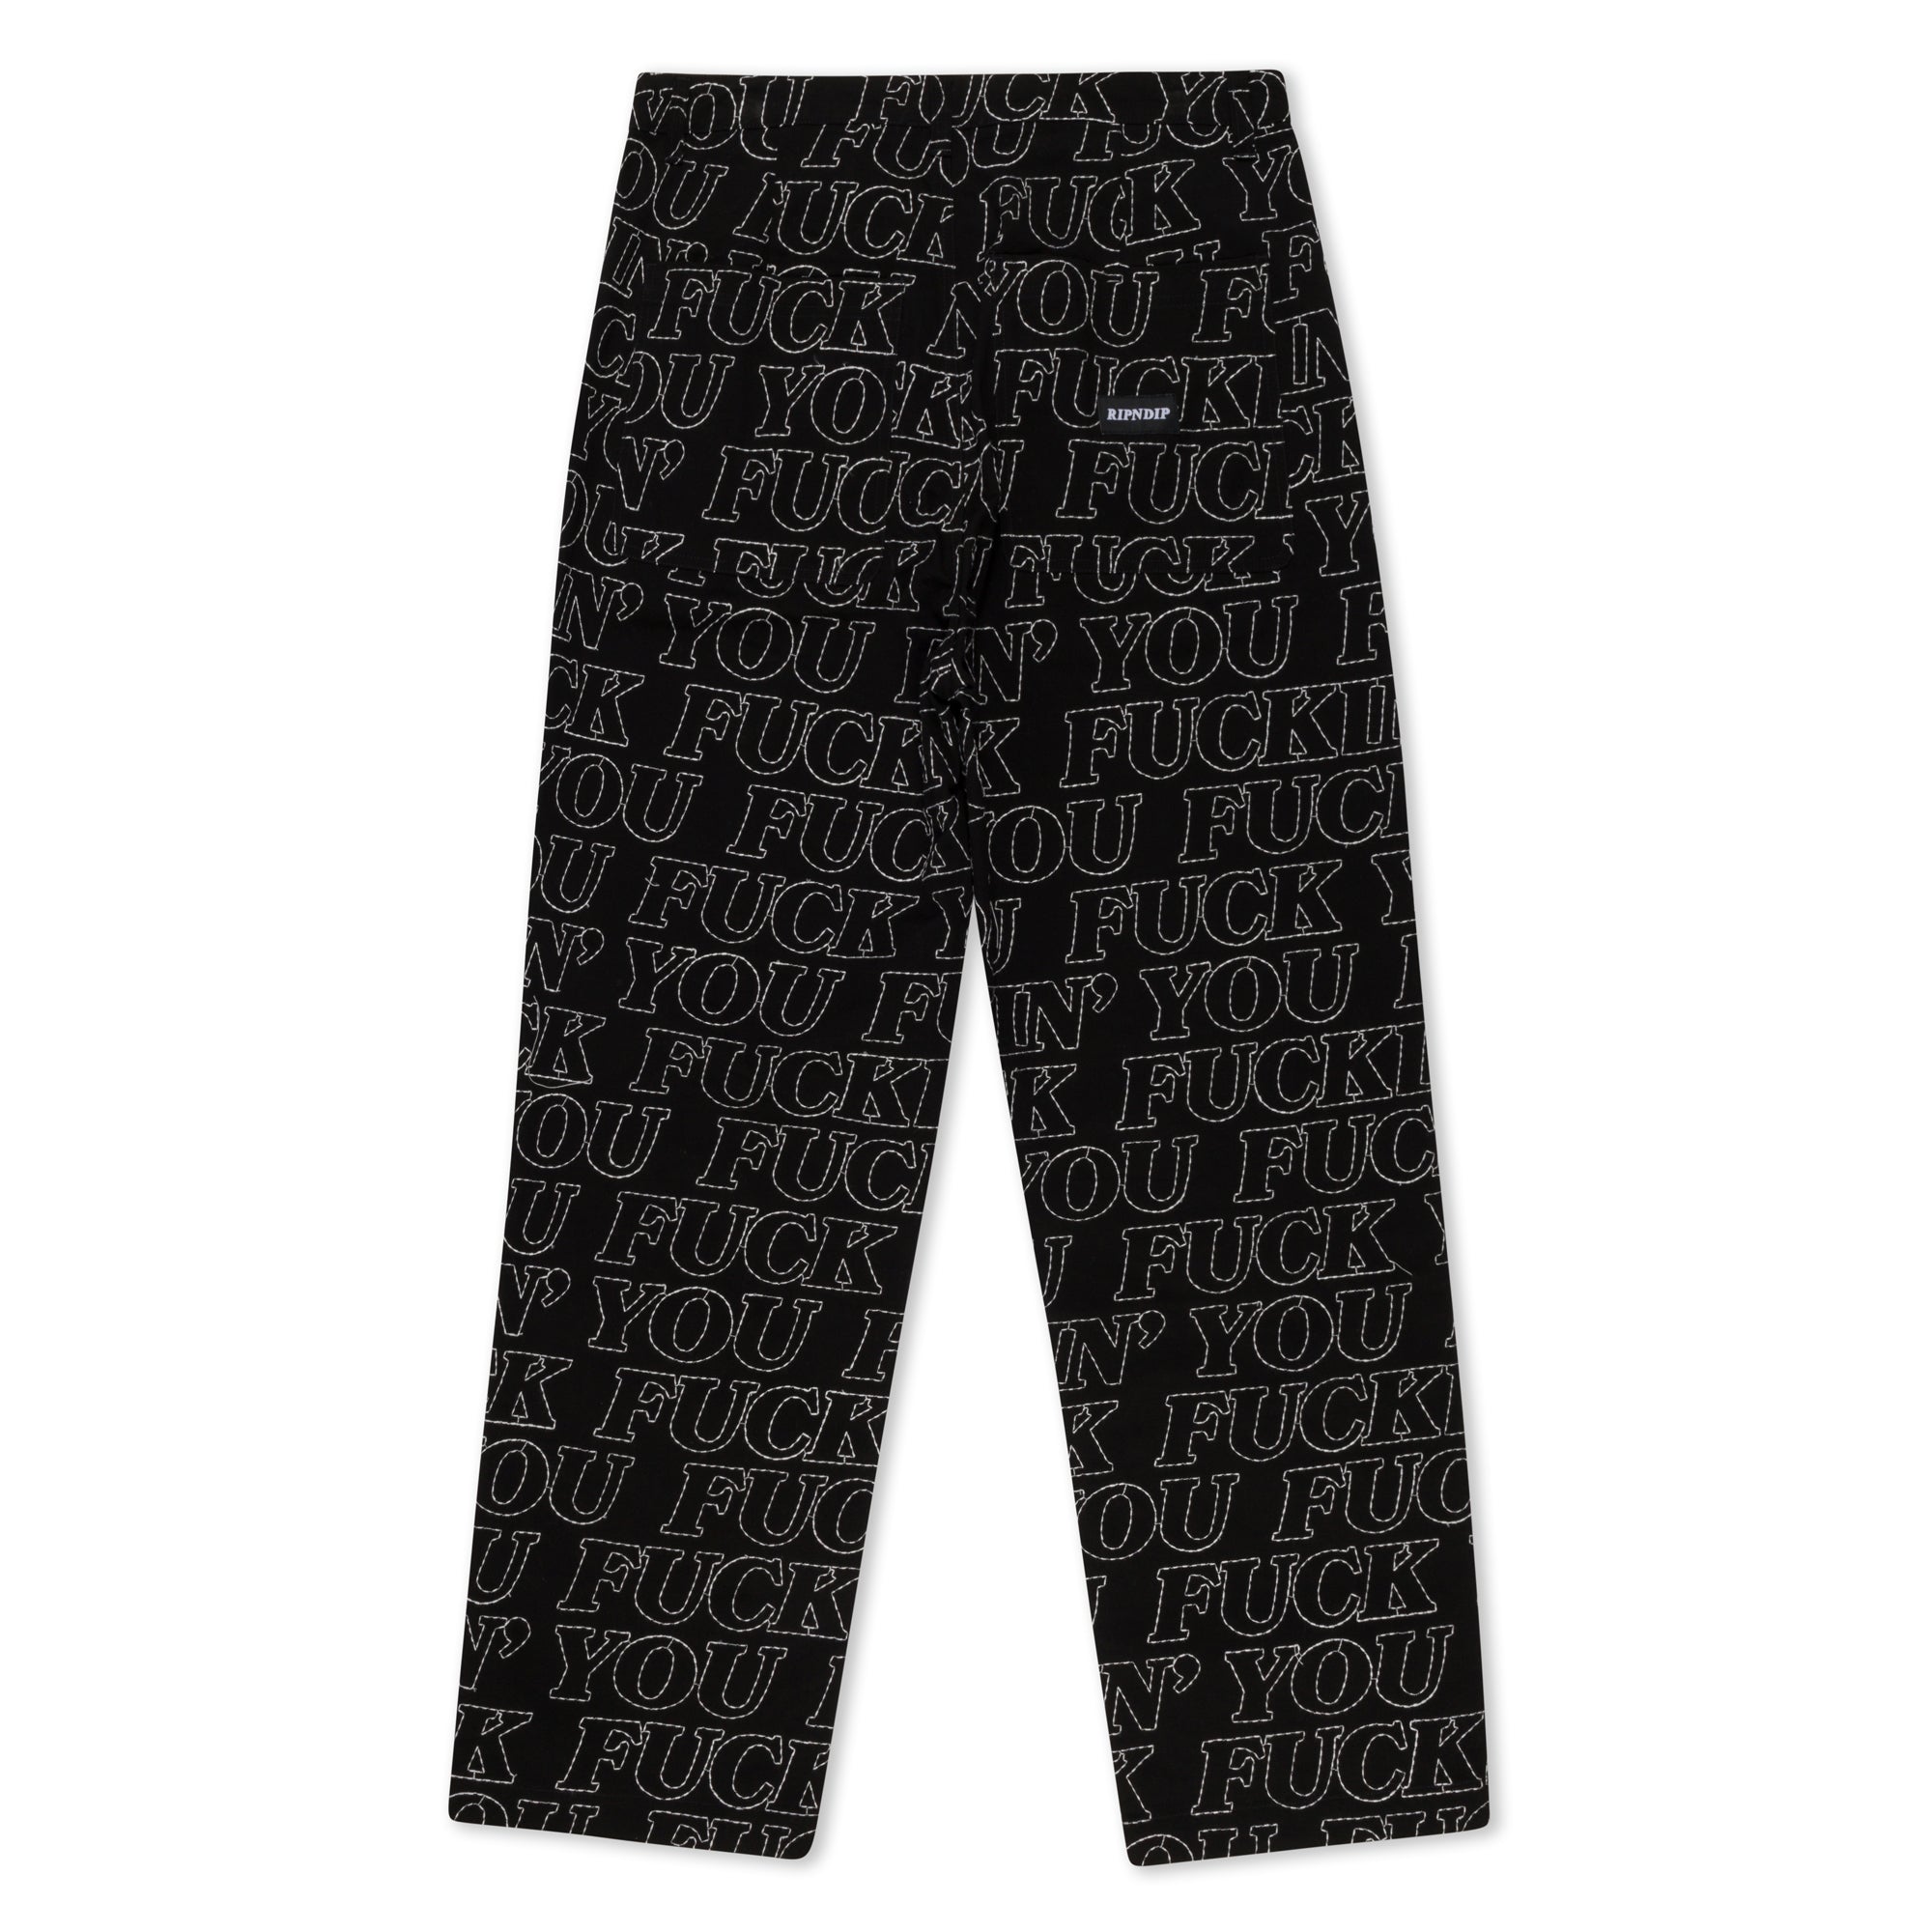 Fuckin Fuck Quilted Wide Leg Pants (Black)